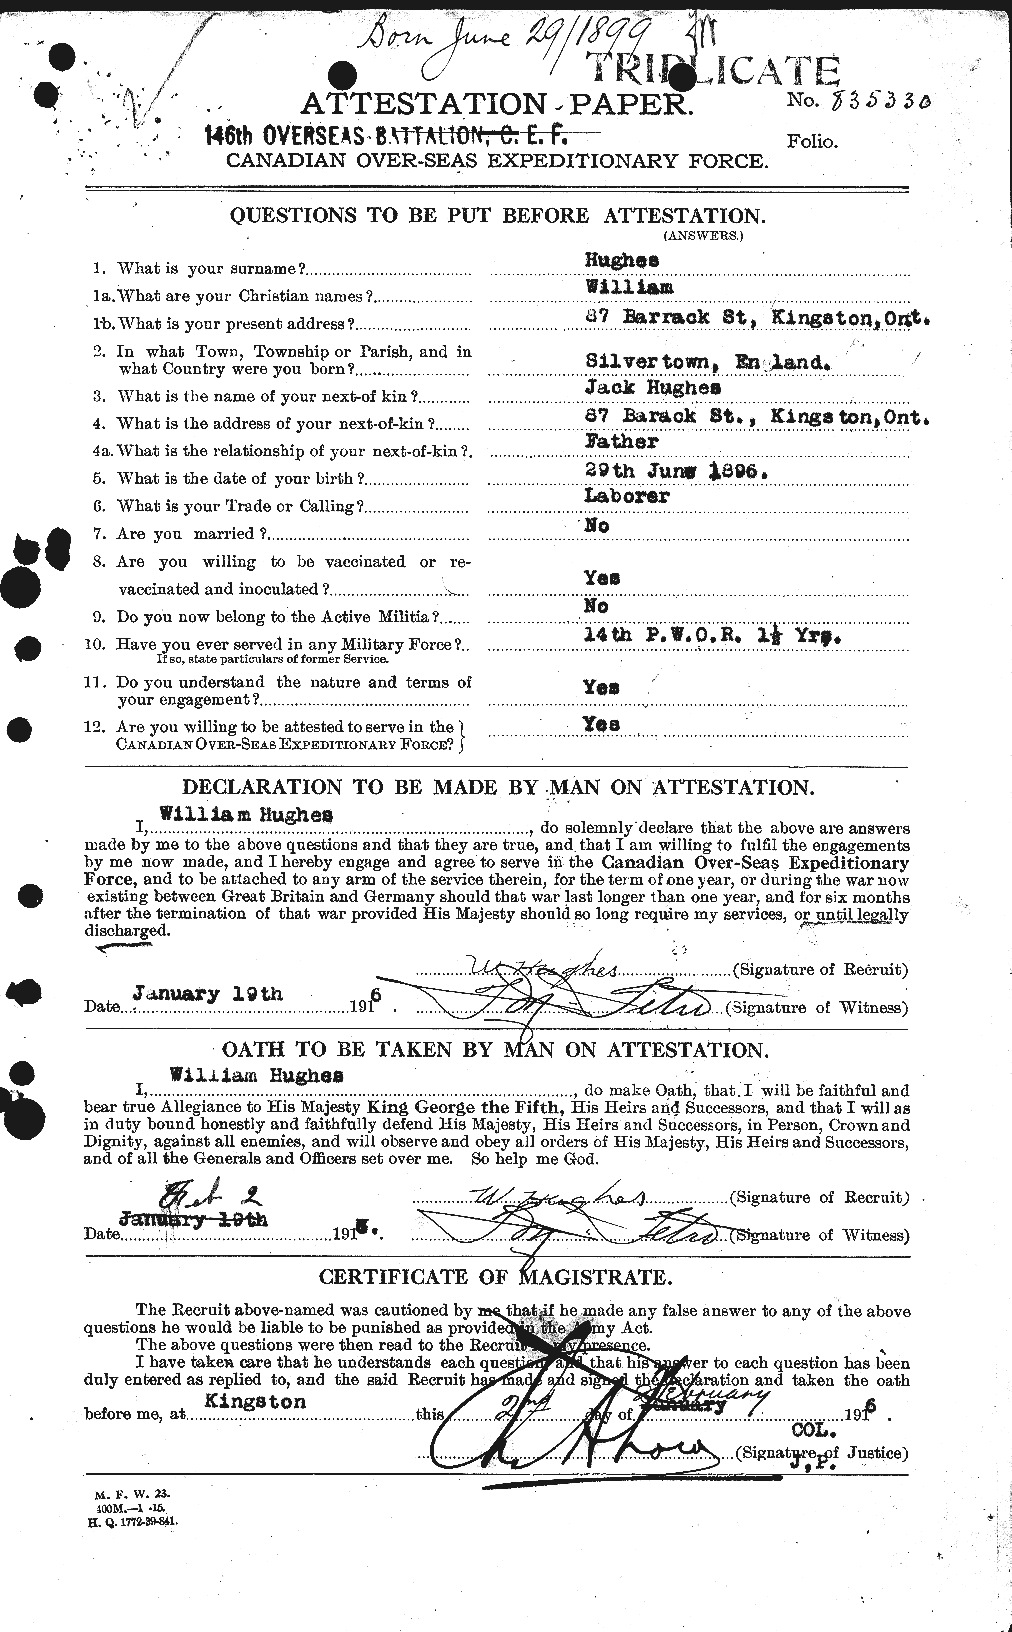 Personnel Records of the First World War - CEF 405904a